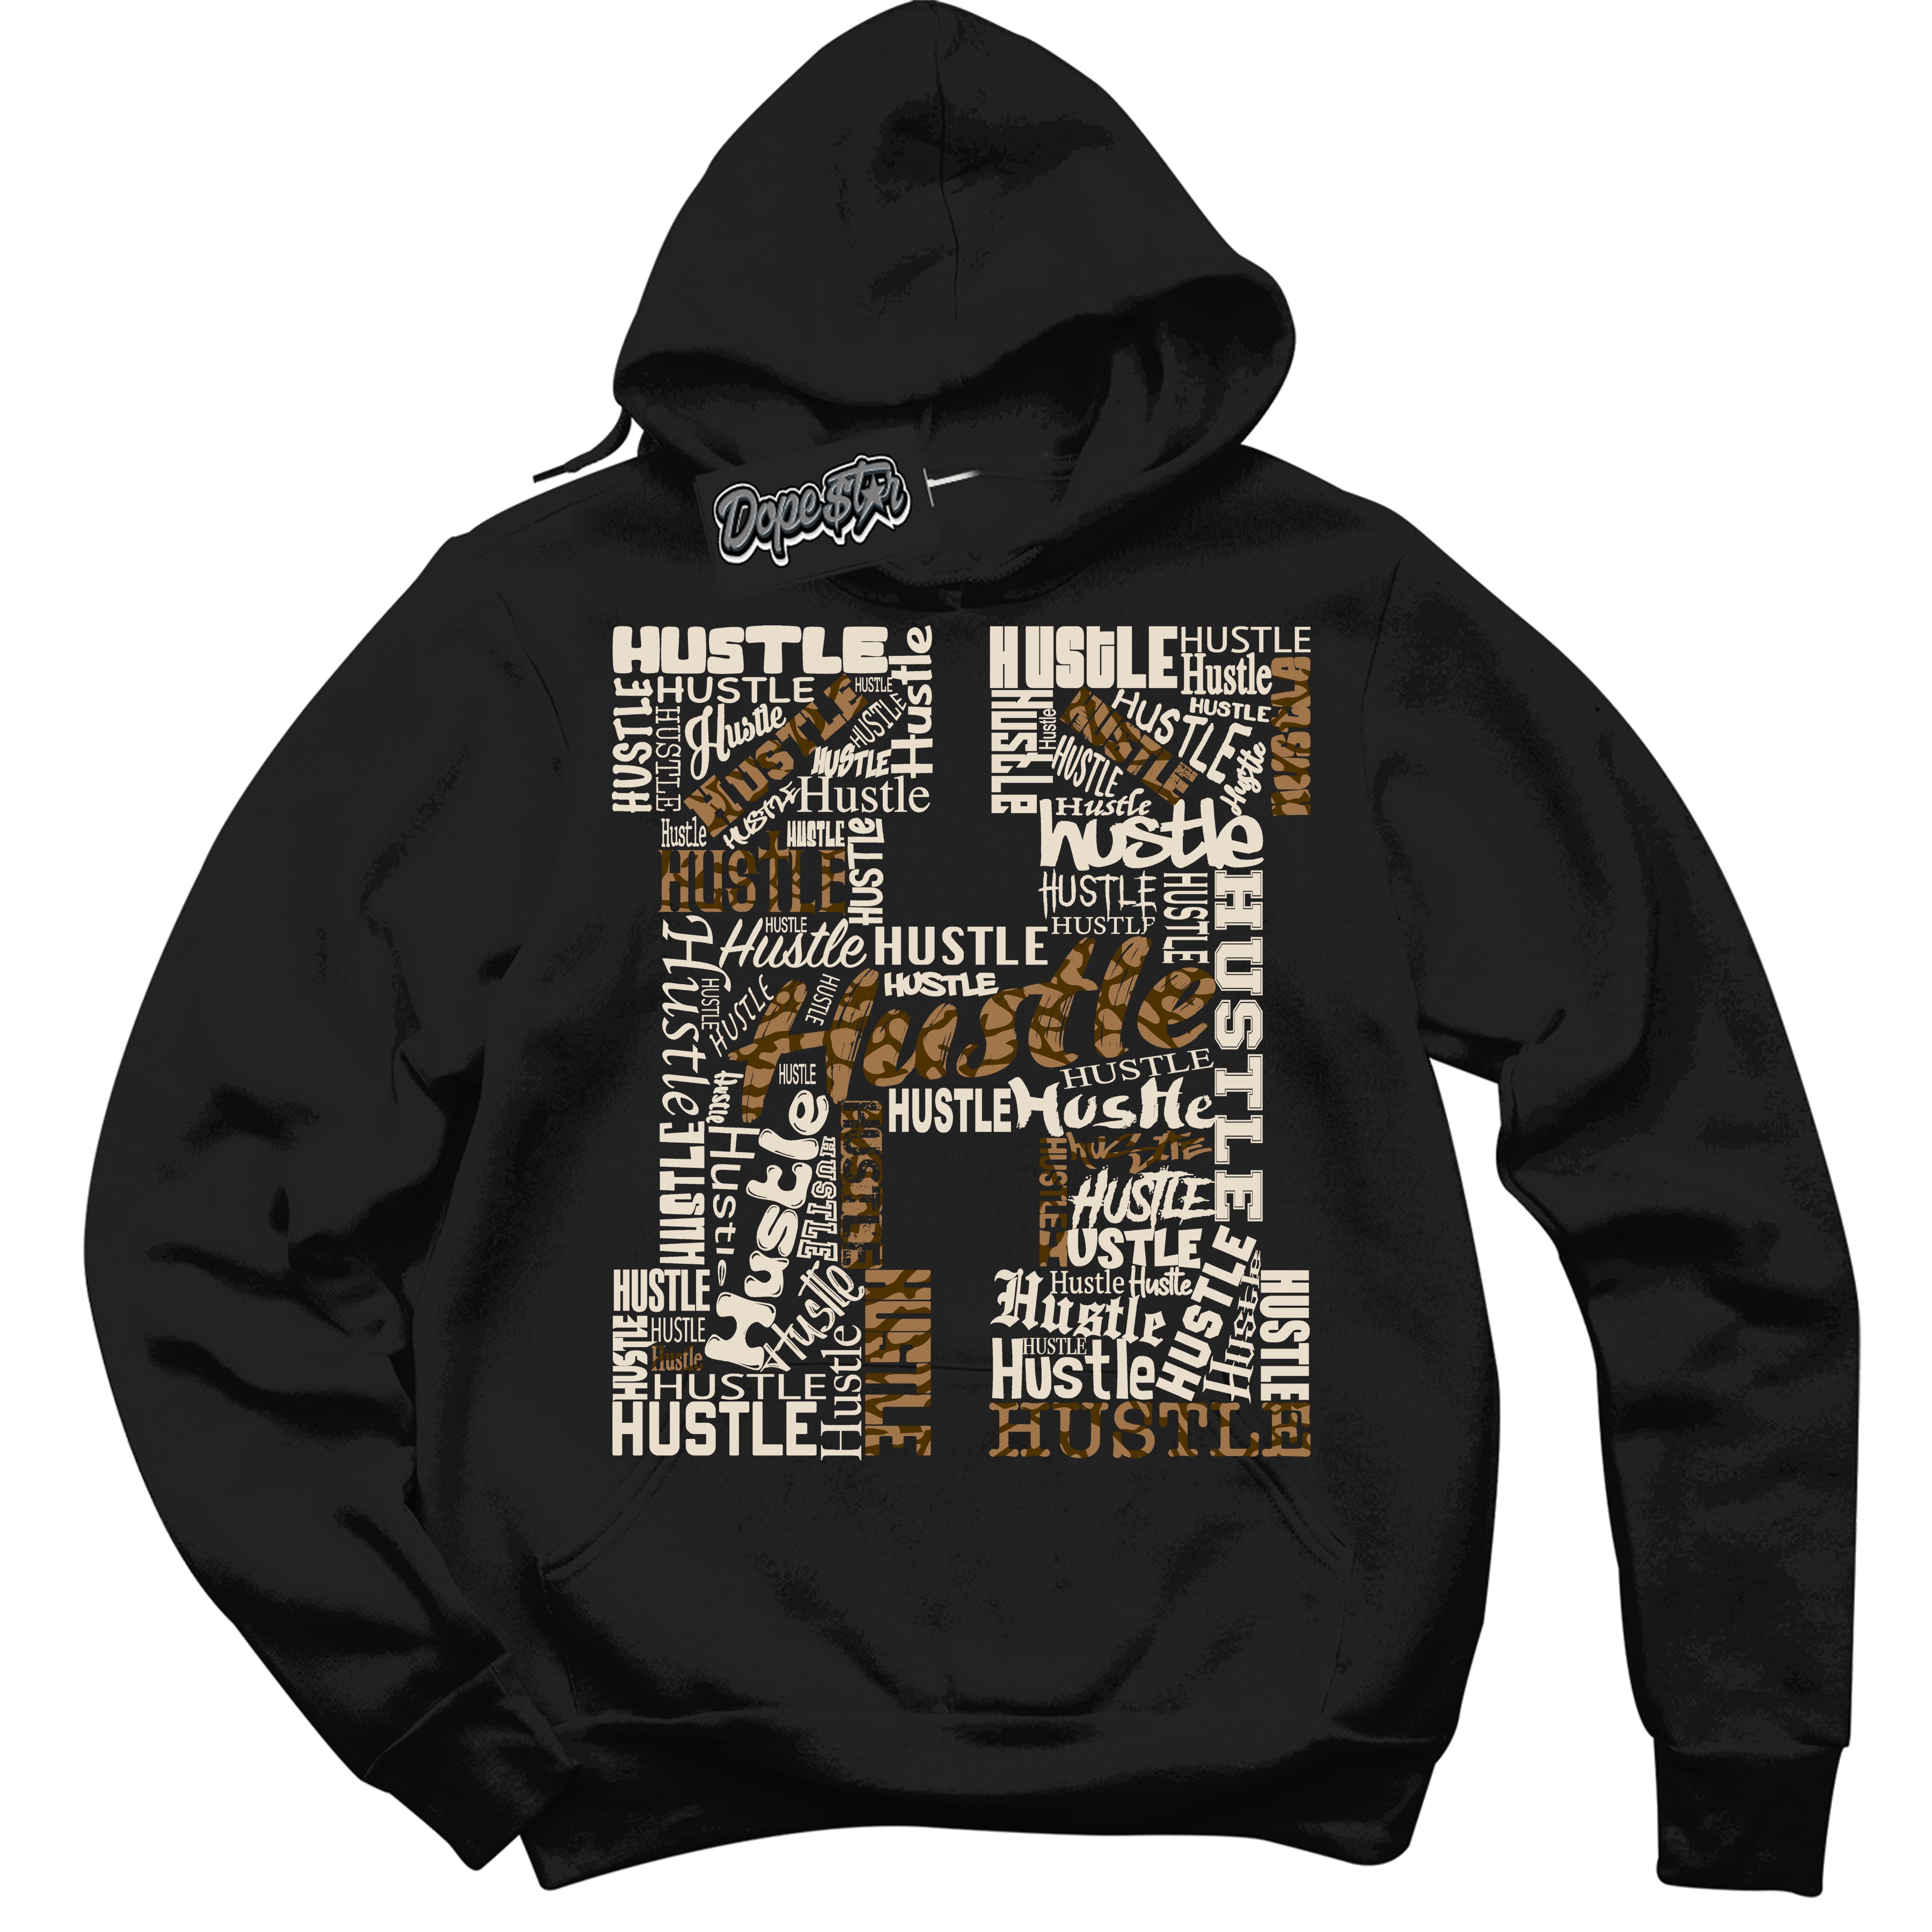 Cool Black Graphic DopeStar Hoodie with “ Hustle H “ print, that perfectly matches Palomino 3s sneakers